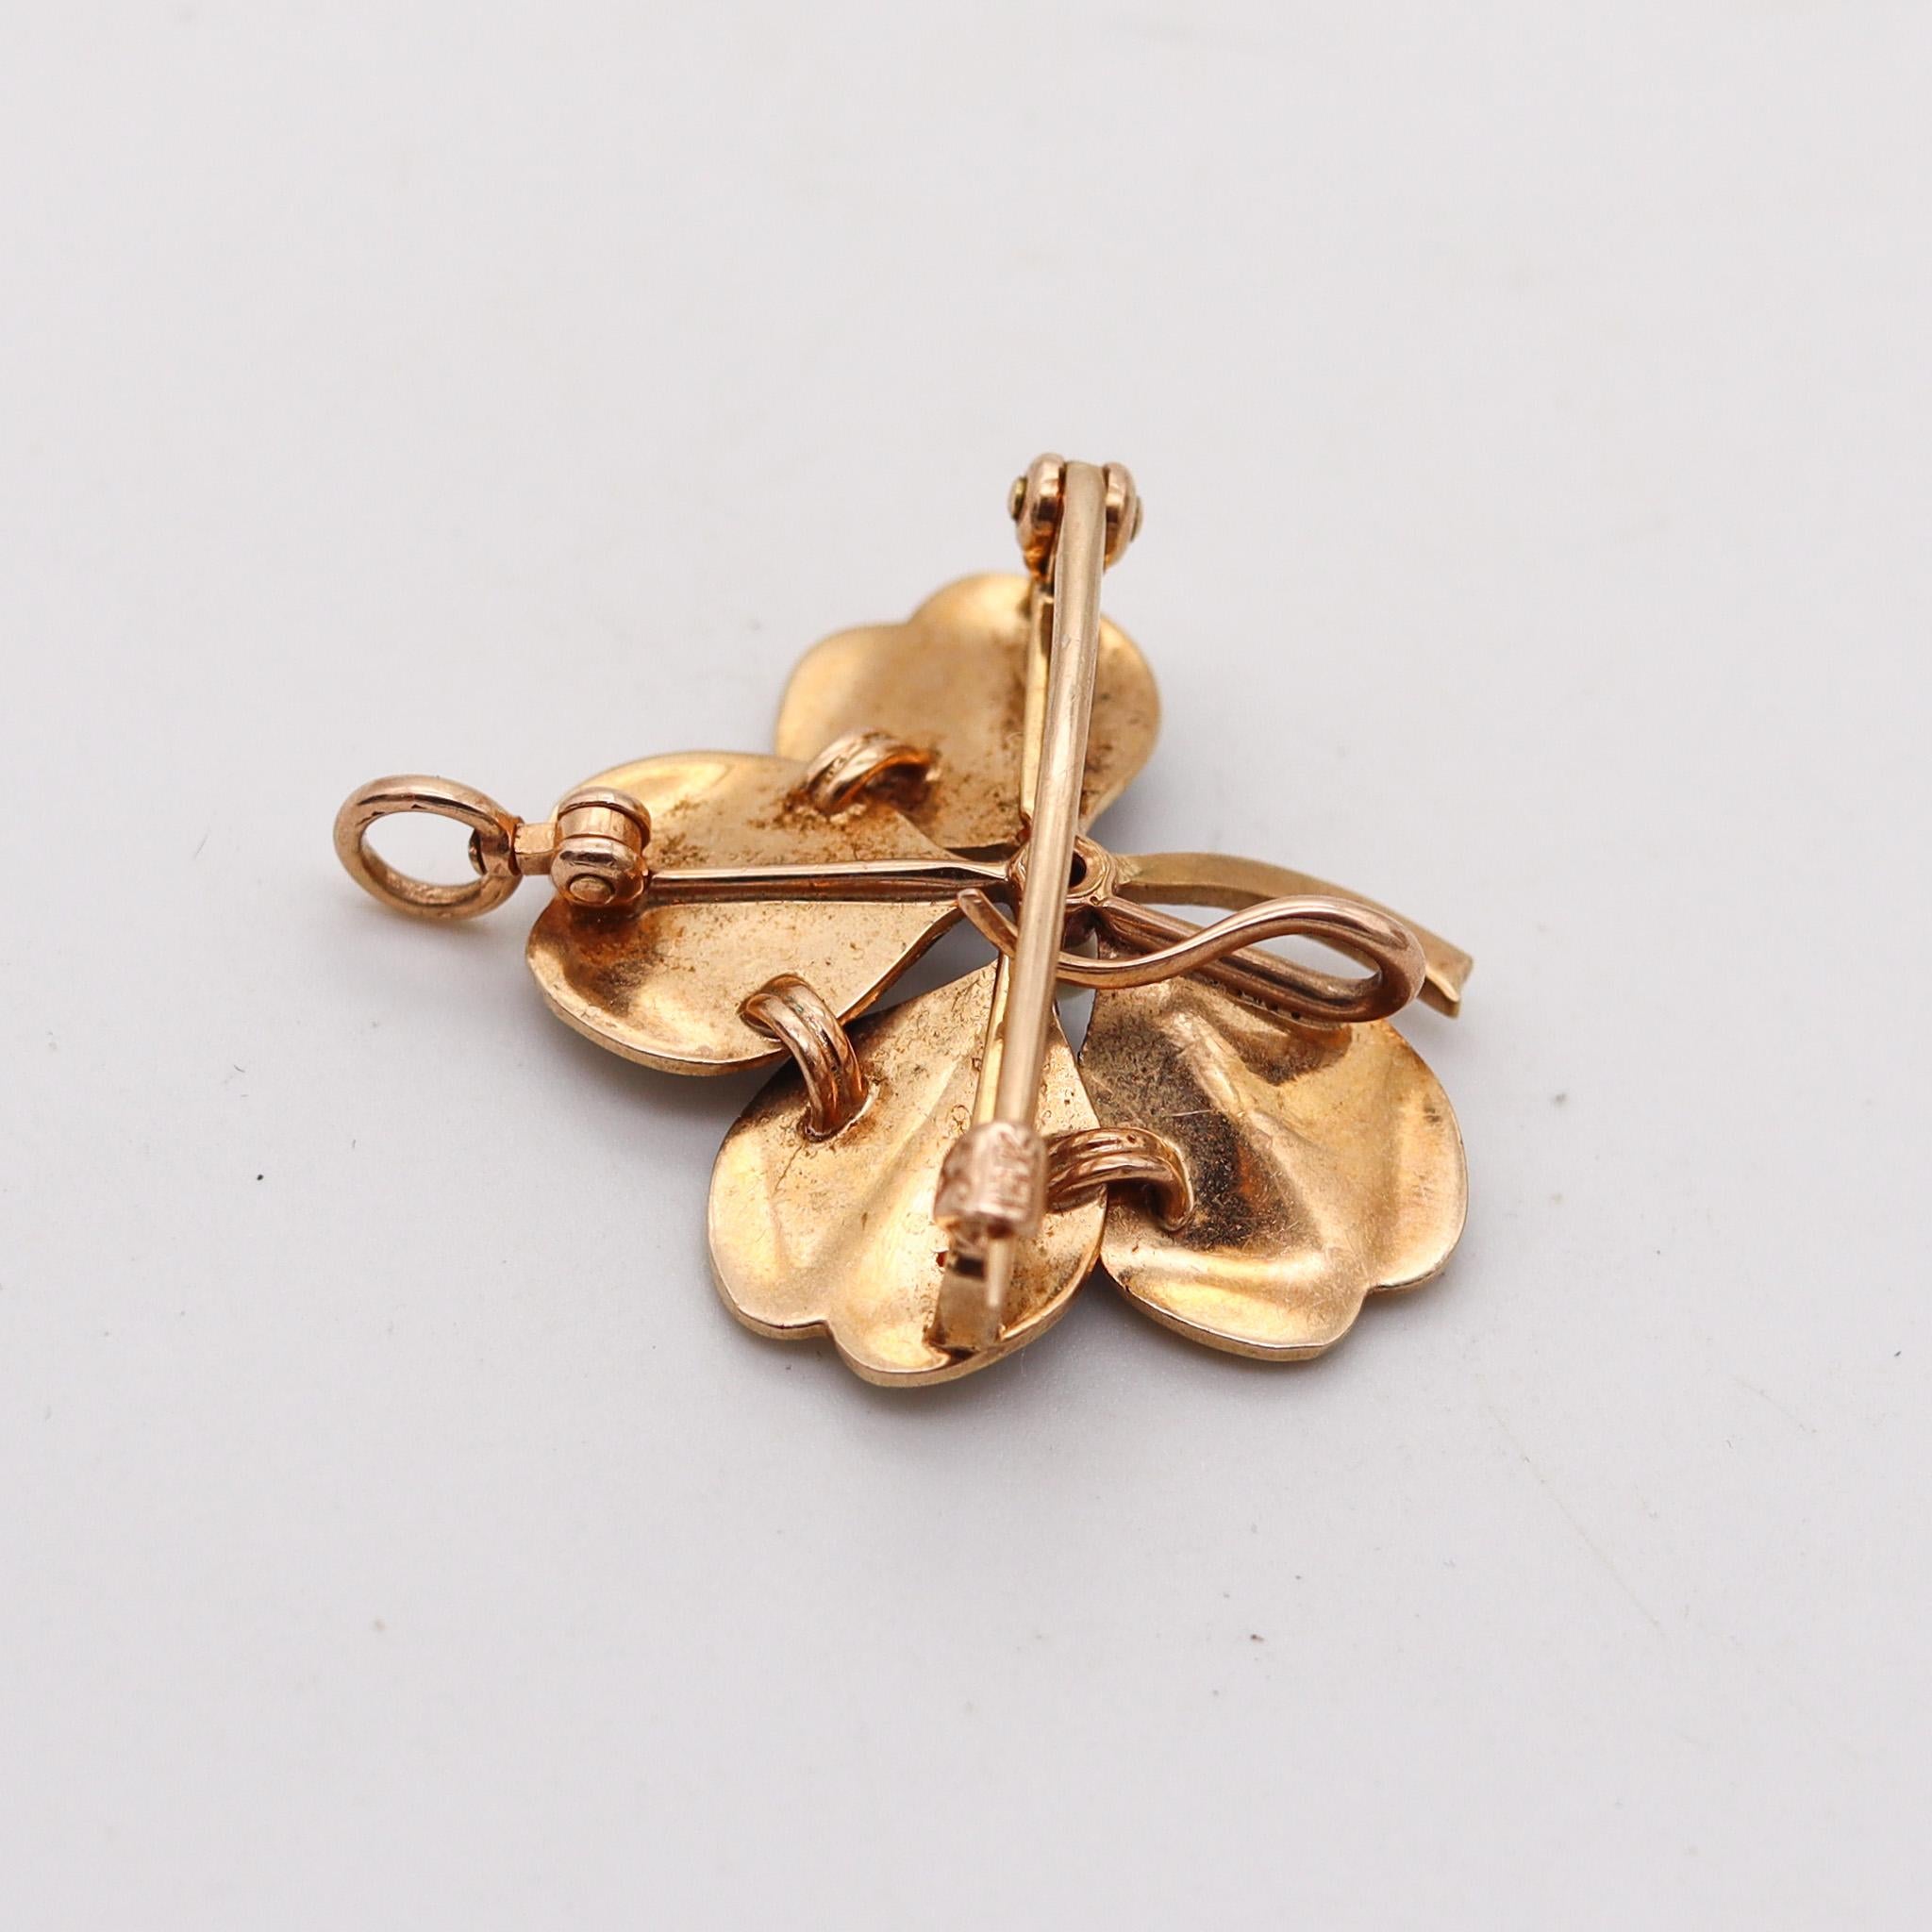 Round Cut Crane & Theurer 1900 Art Nouveau Enameled Clover Pendant 14Kt Gold With Pearls For Sale